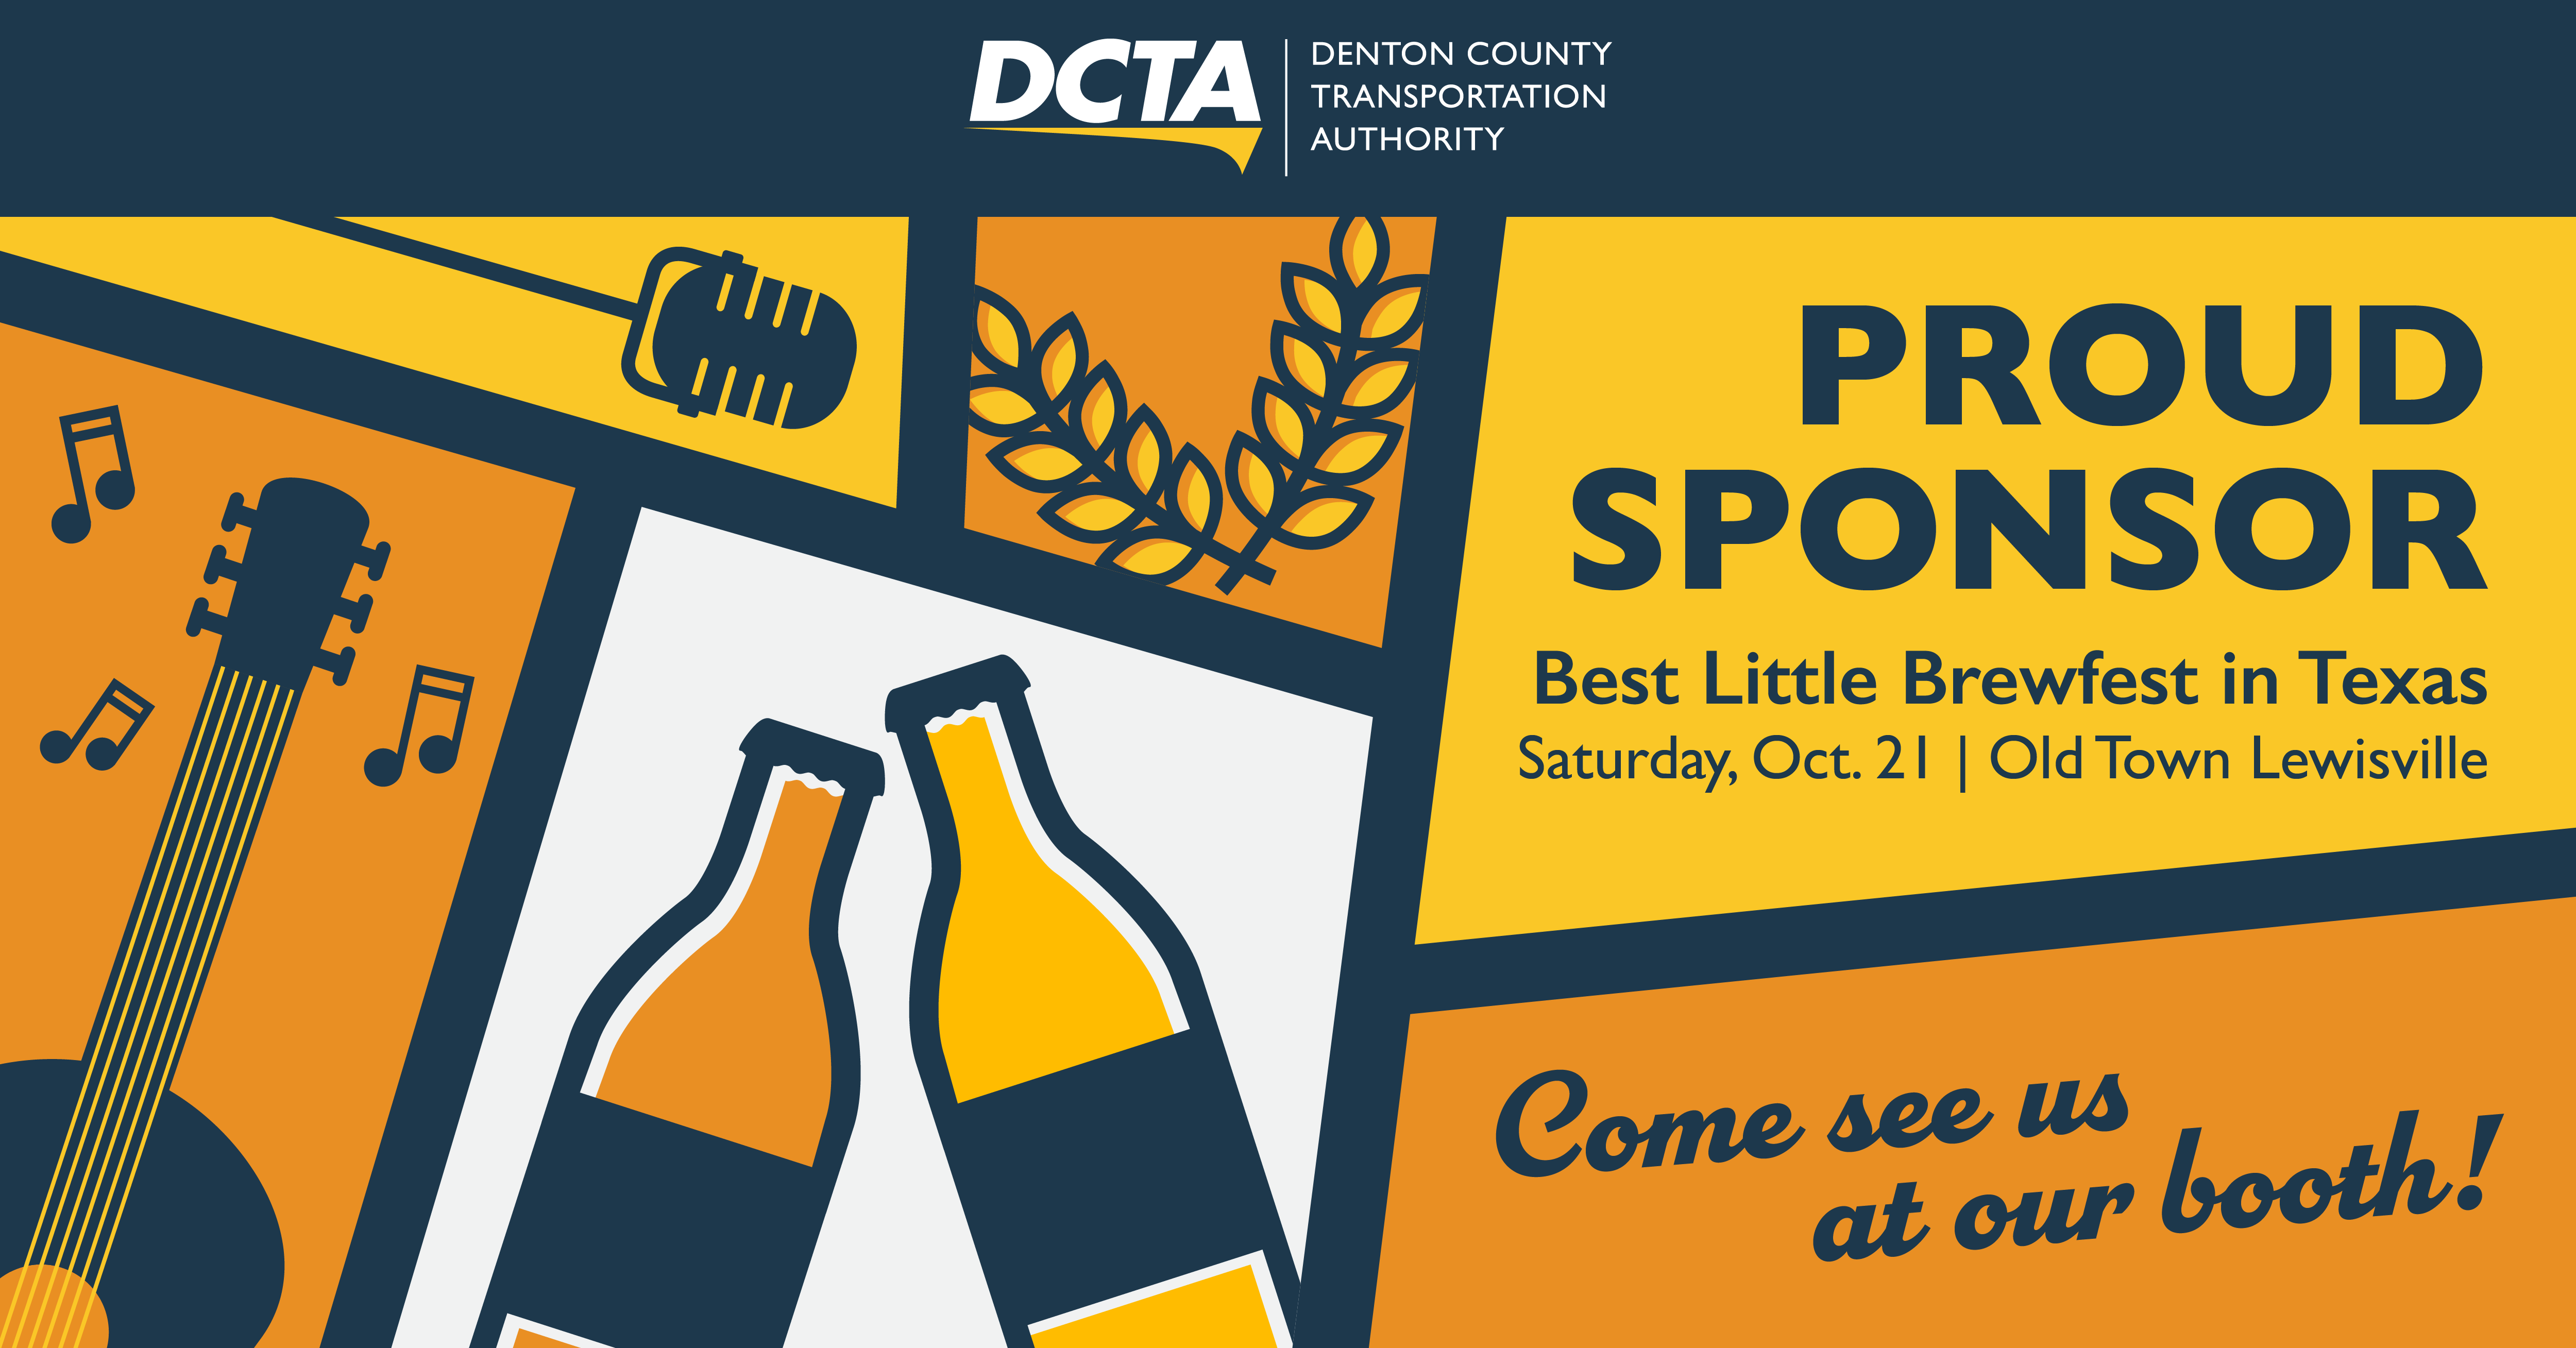 Free DCTA Shuttle Service to the Best Little Brewfest in Texas